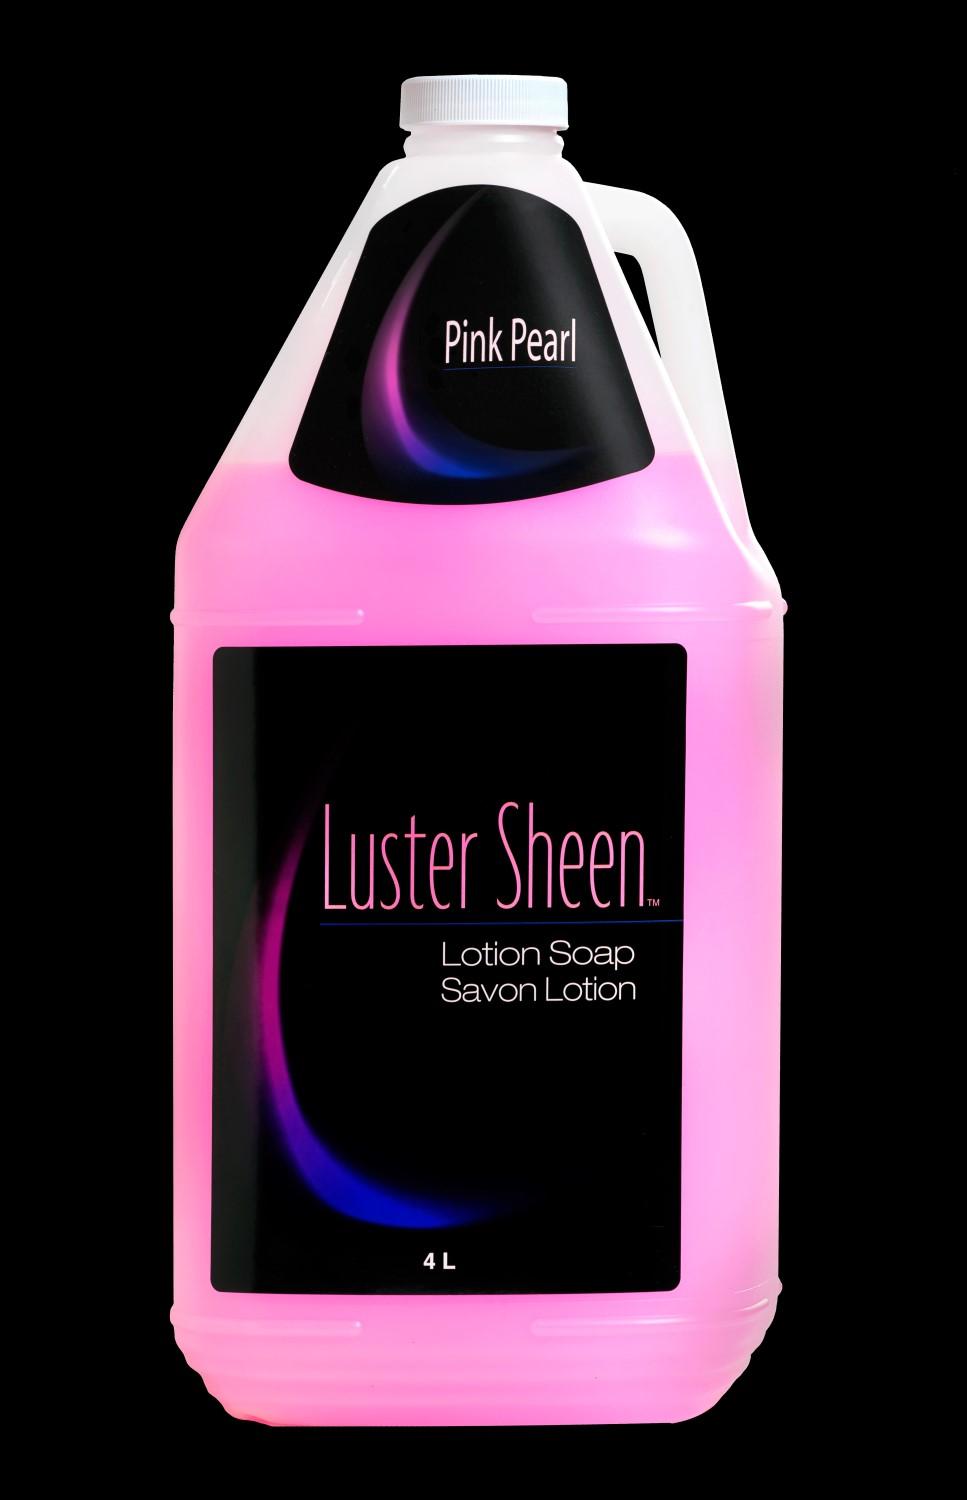 ....... LUSTER SHEEN LOTION SOAPS A FULL BODY LOTION SOAP LINE Cleans and Moisturizes Achieves a Standard of Excellence designed to meet all Health, Safety and Environmental Challenges.